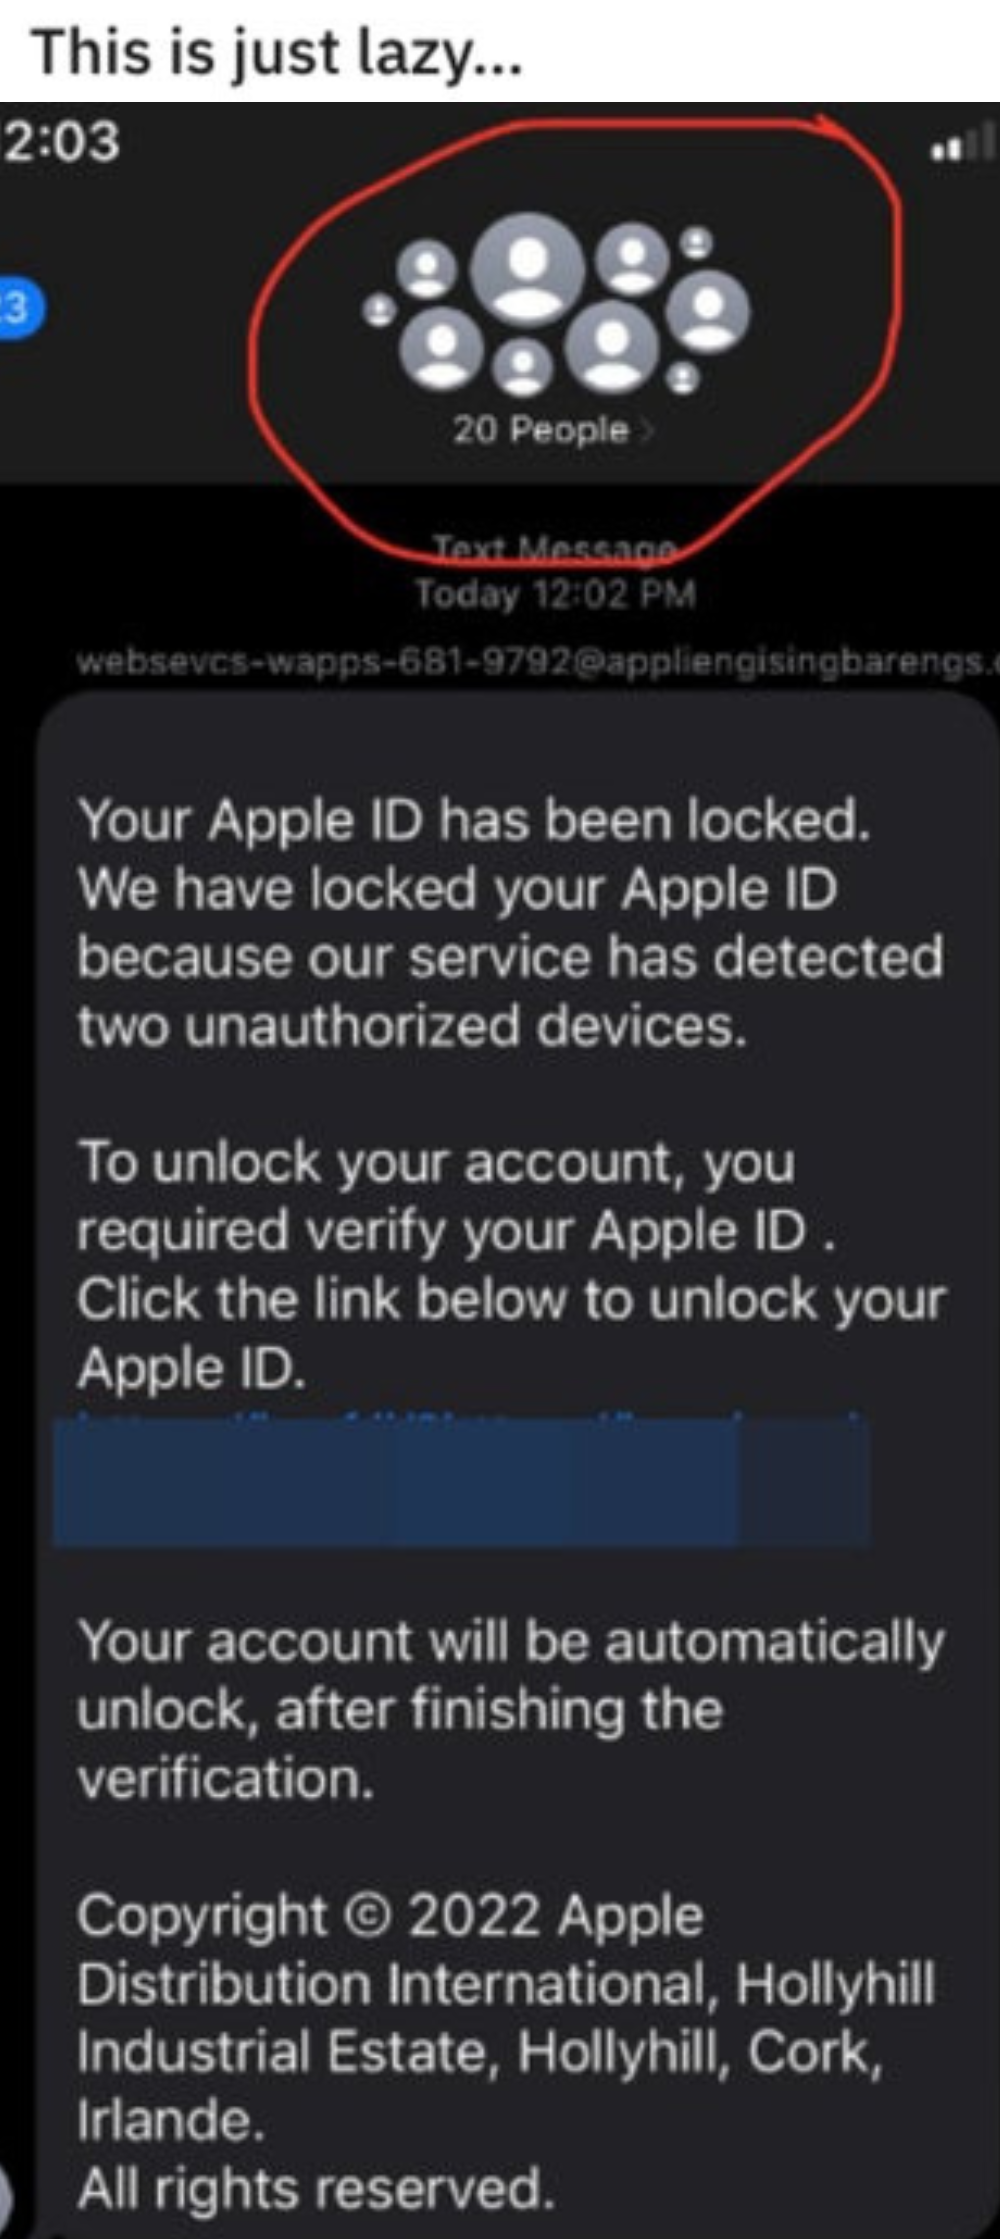 group message that an Apple ID was locked and it &quot;will be automatically unlock&quot;